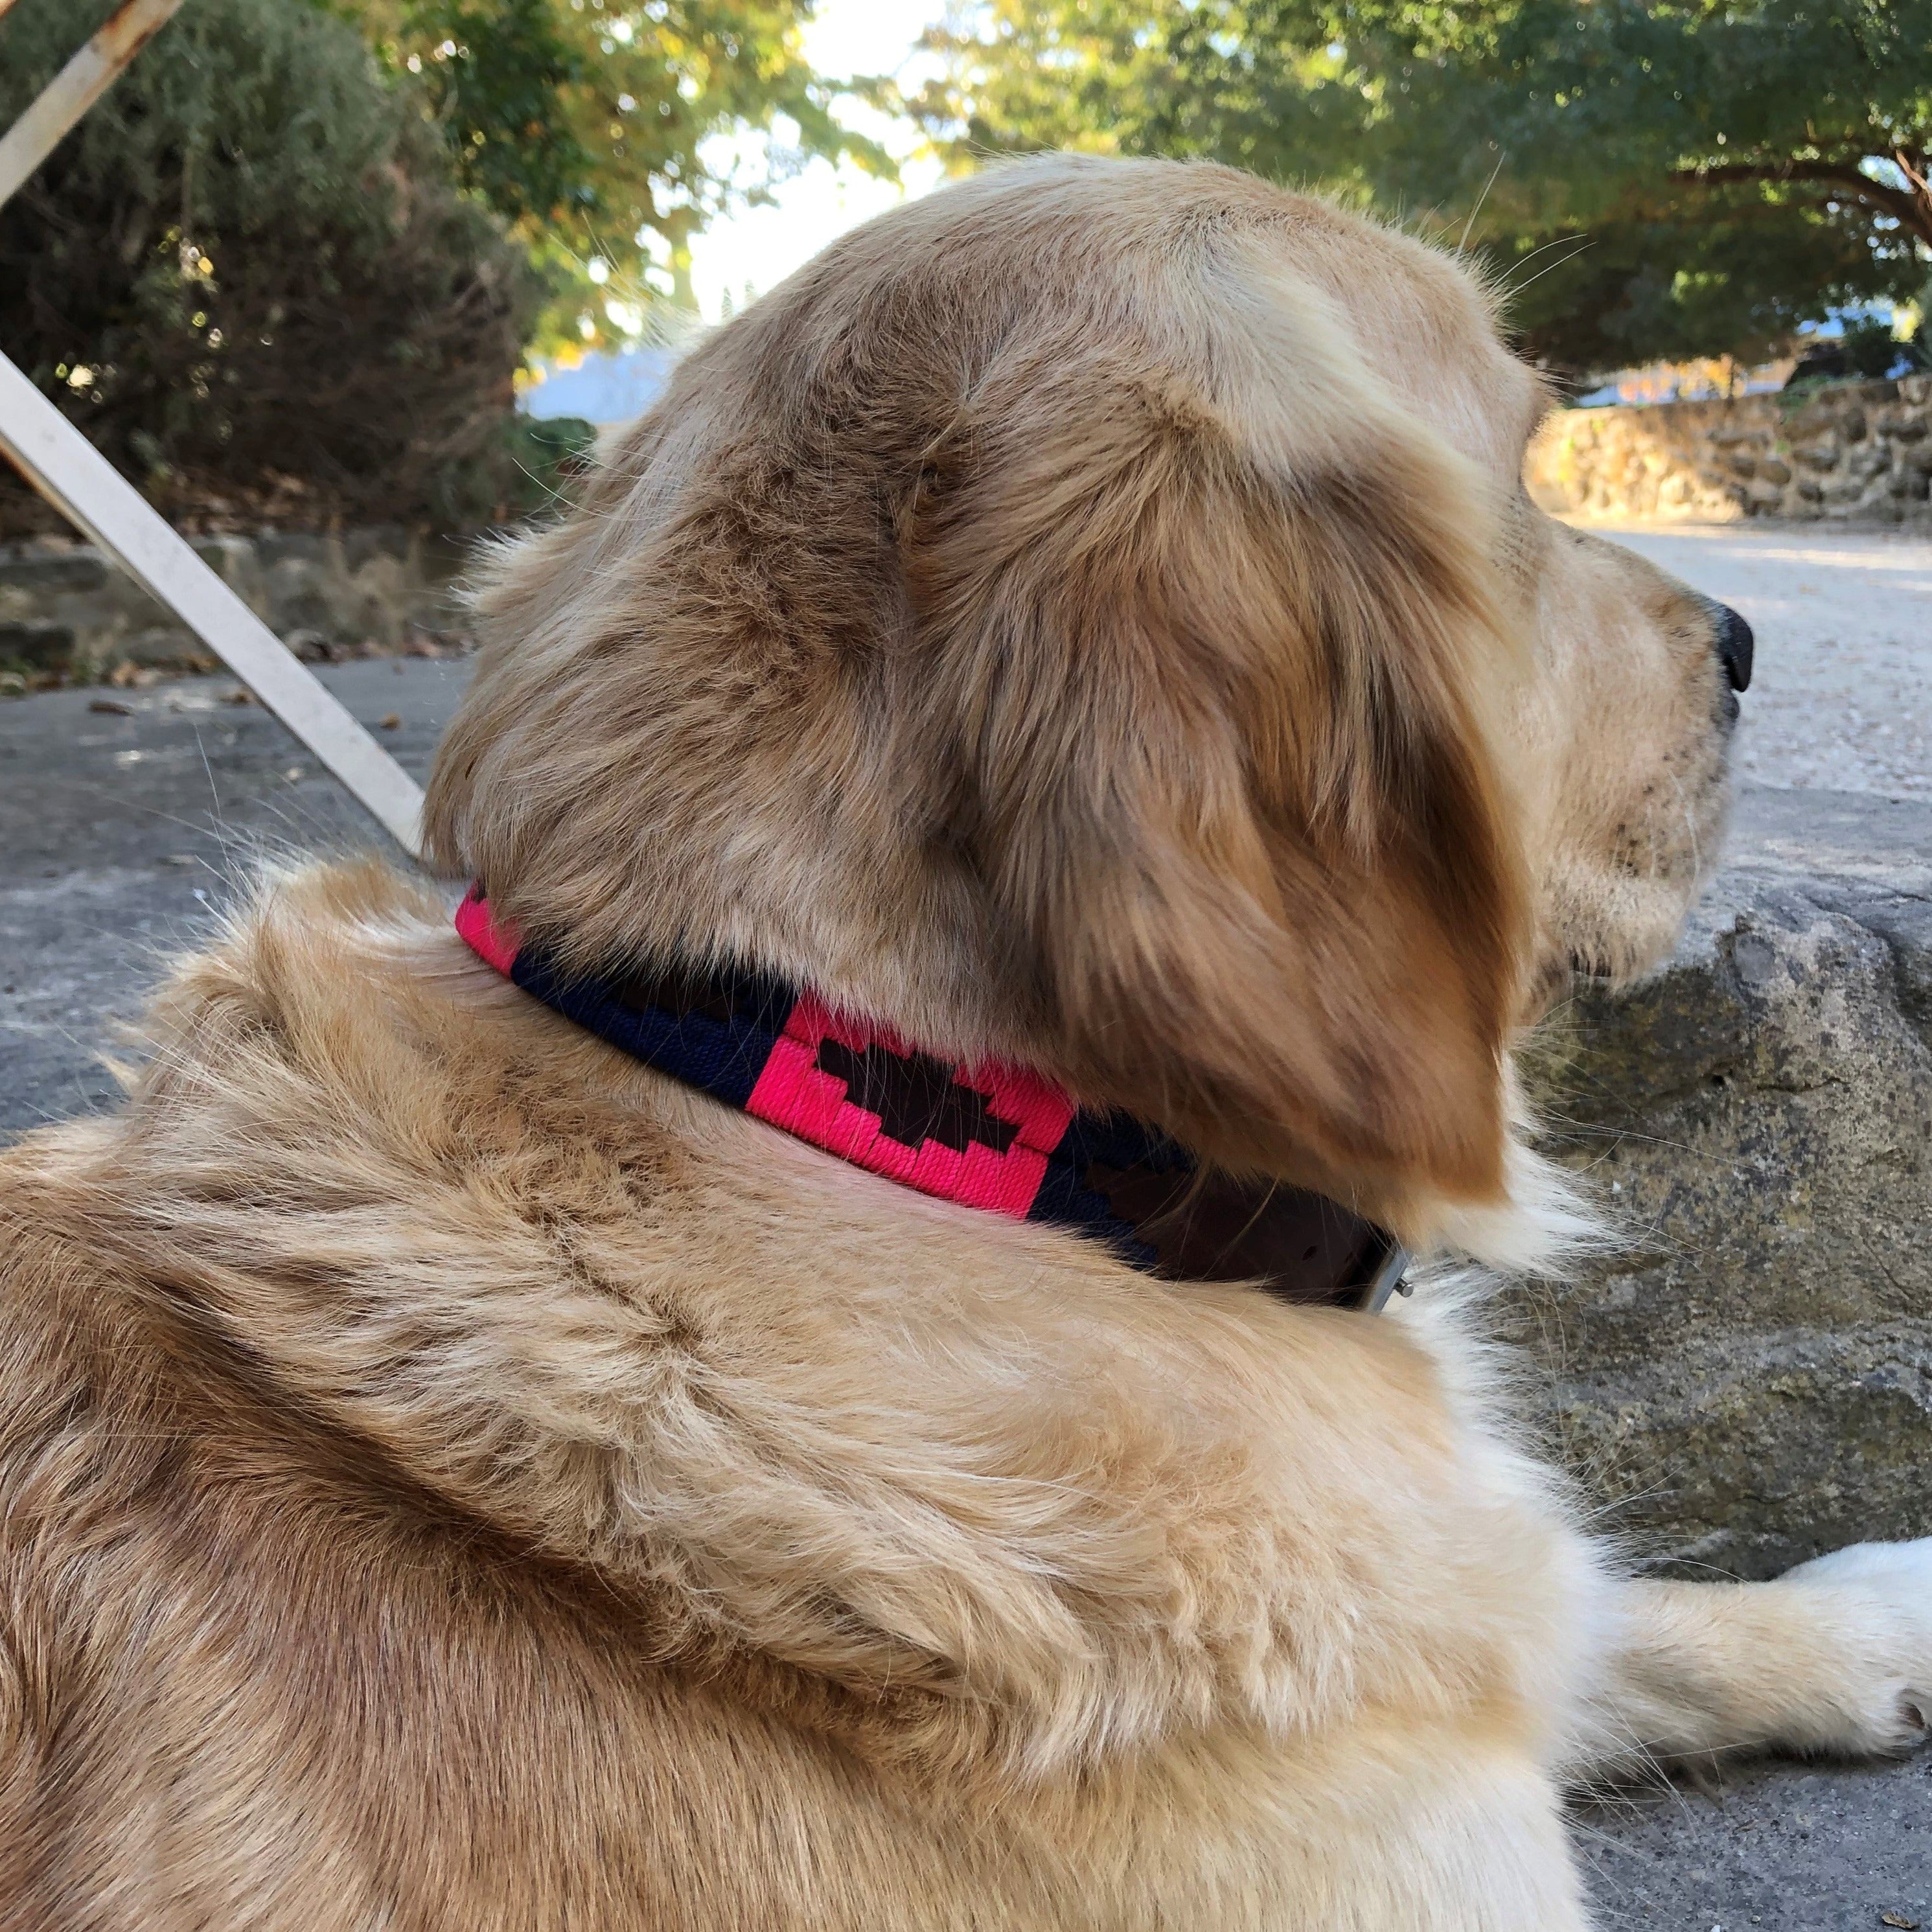 A golden retriever lies on the ground, wearing a Georgie Paws Polo Collar - Charming, attentively gazing into the distance with a serene backdrop of trees and sunlight filtering through leaves.